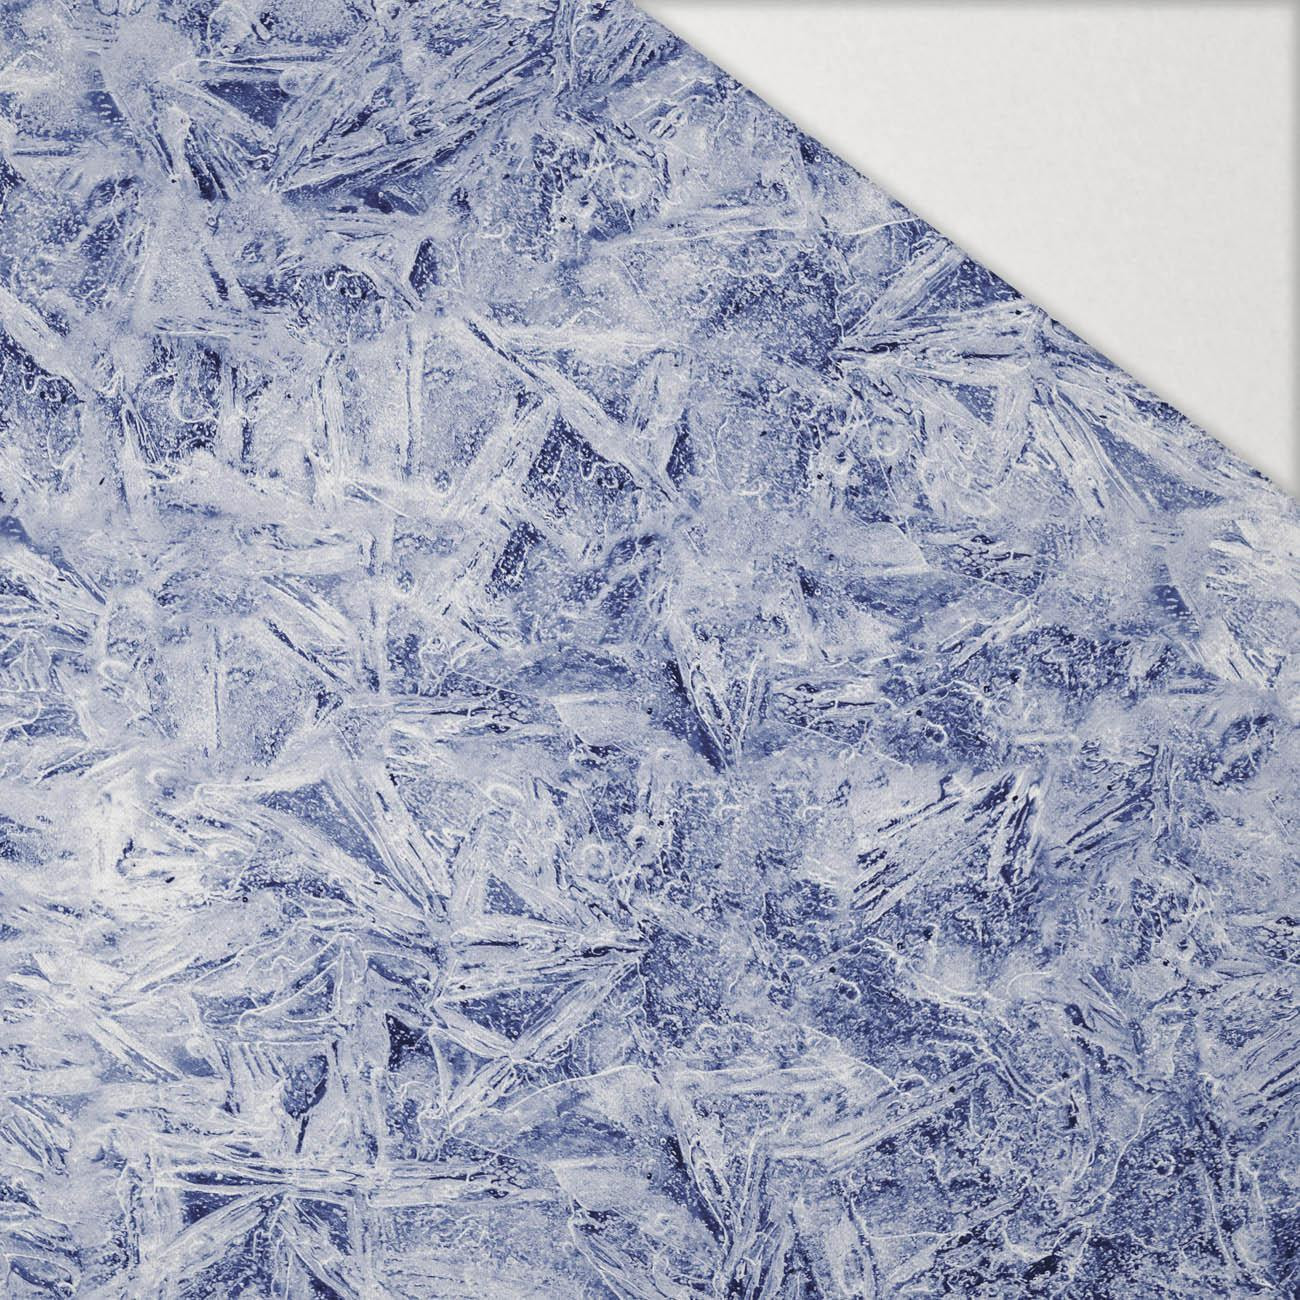 FROST pat. 2 / blue (PAINTED ON GLASS) - Hydrophobic brushed knit